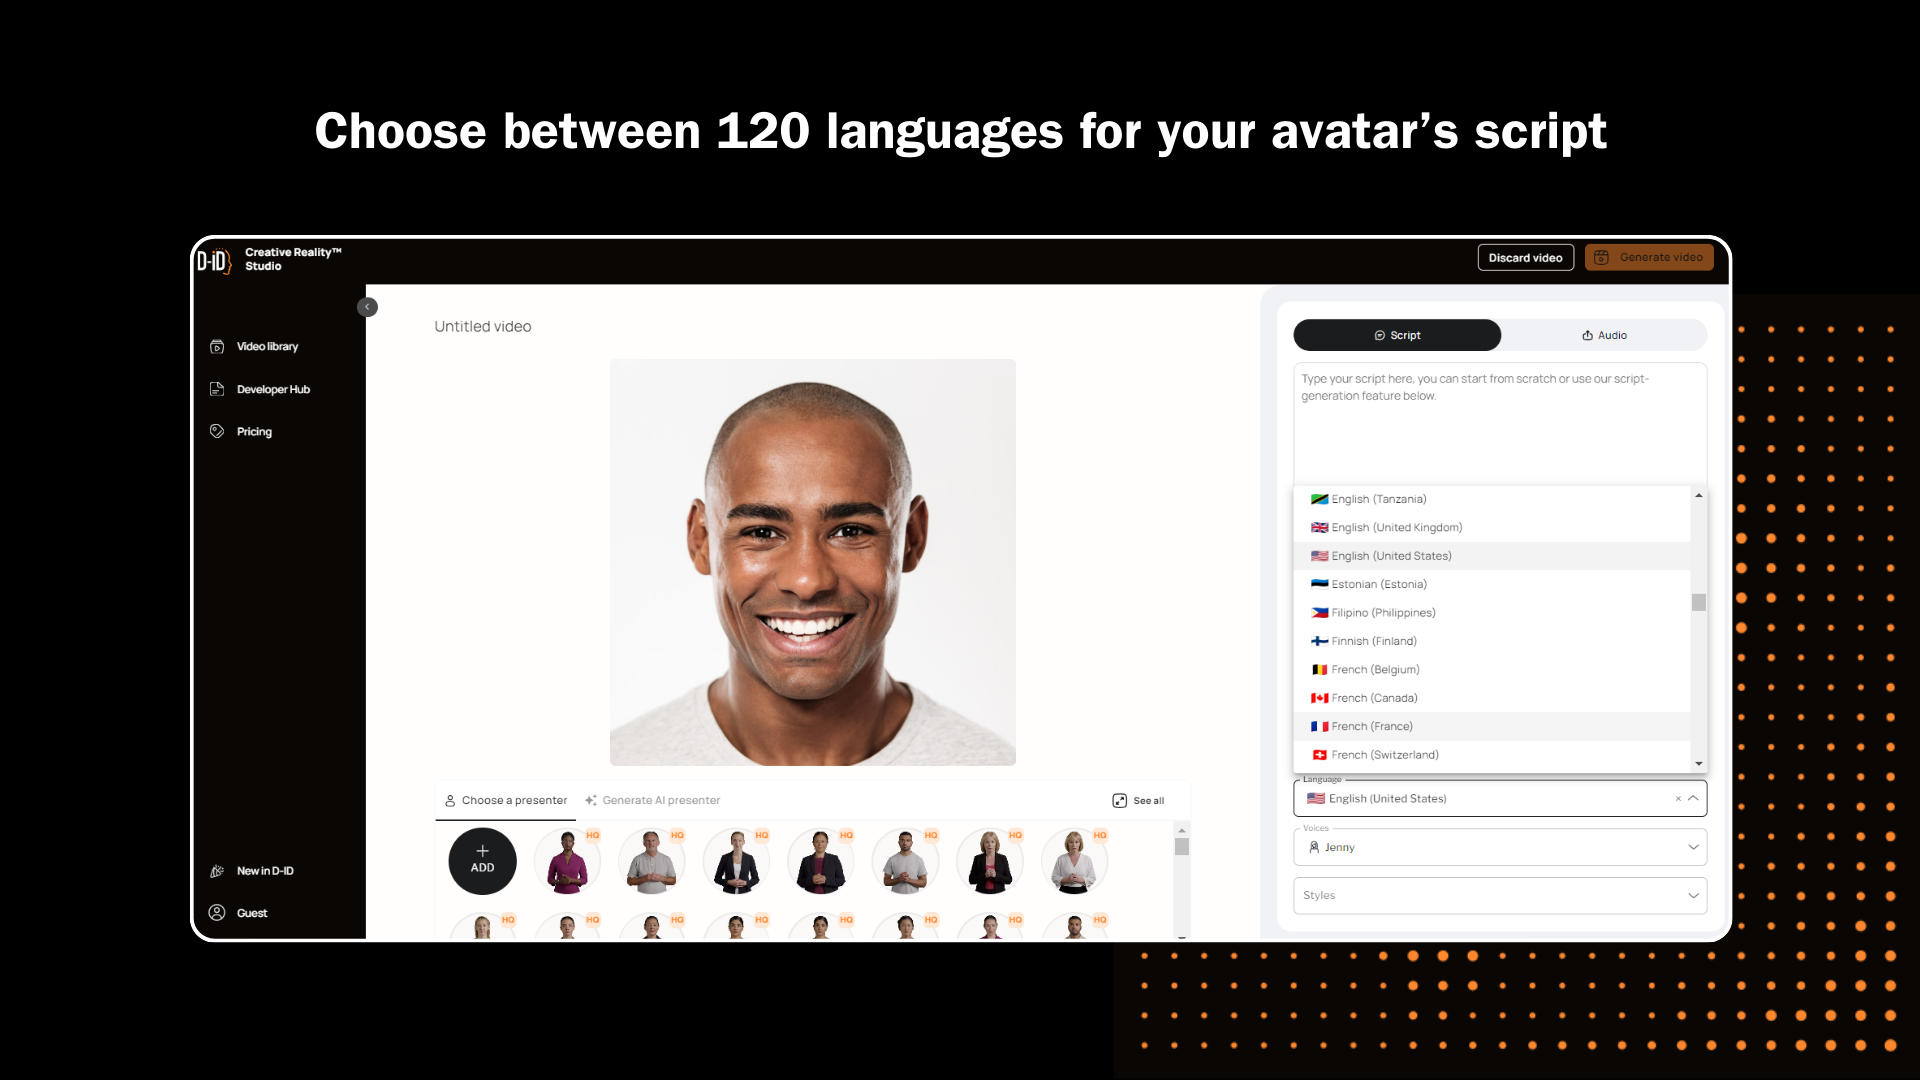 Generate speaking video in 30 seconds. Free trial available.